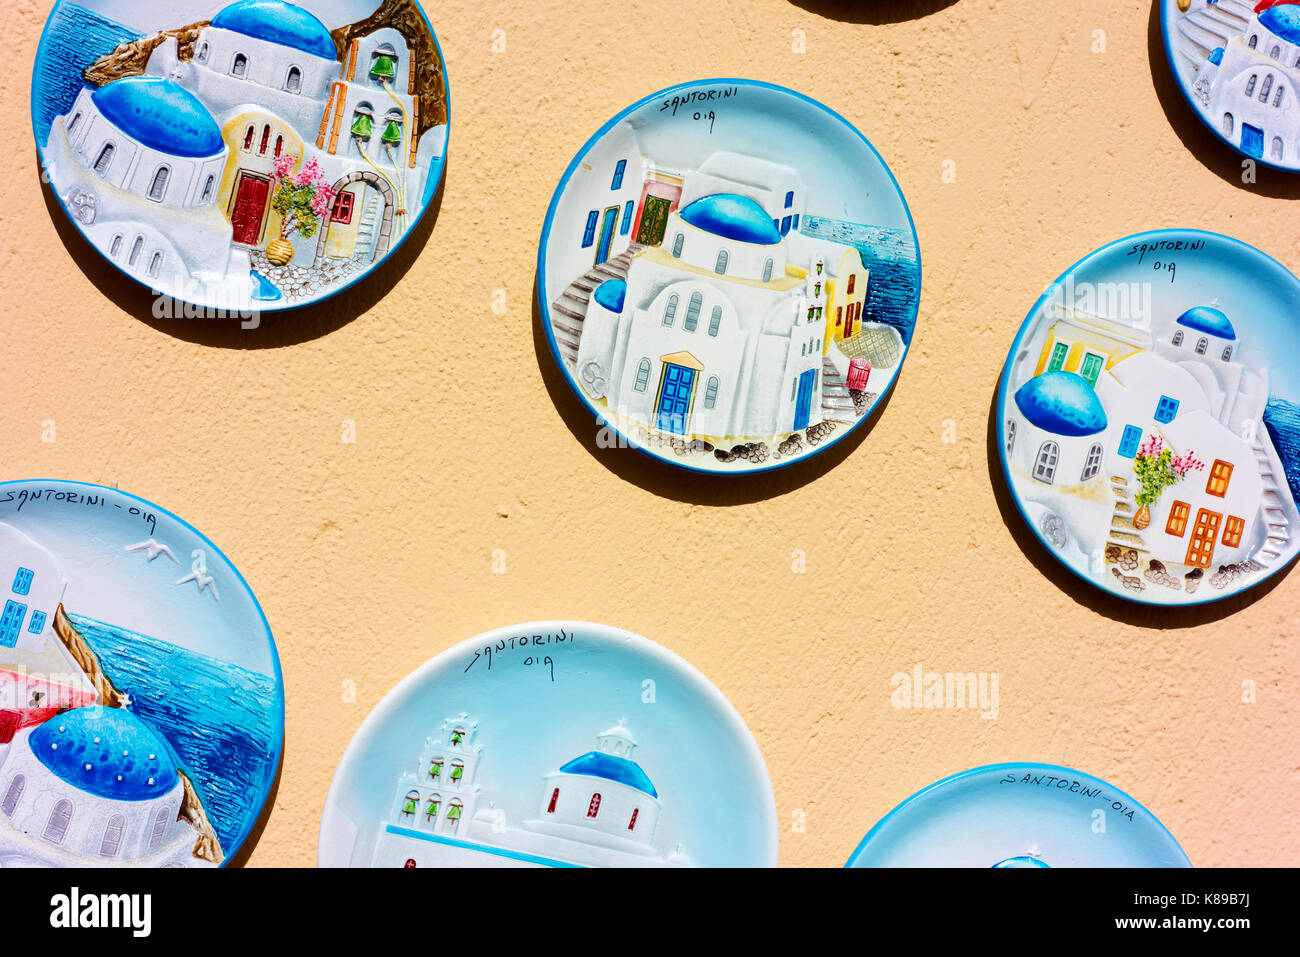 Plates decorated with Greek island scenes for sale to tourists in Fira, the main village on Santorini. Stock Photo